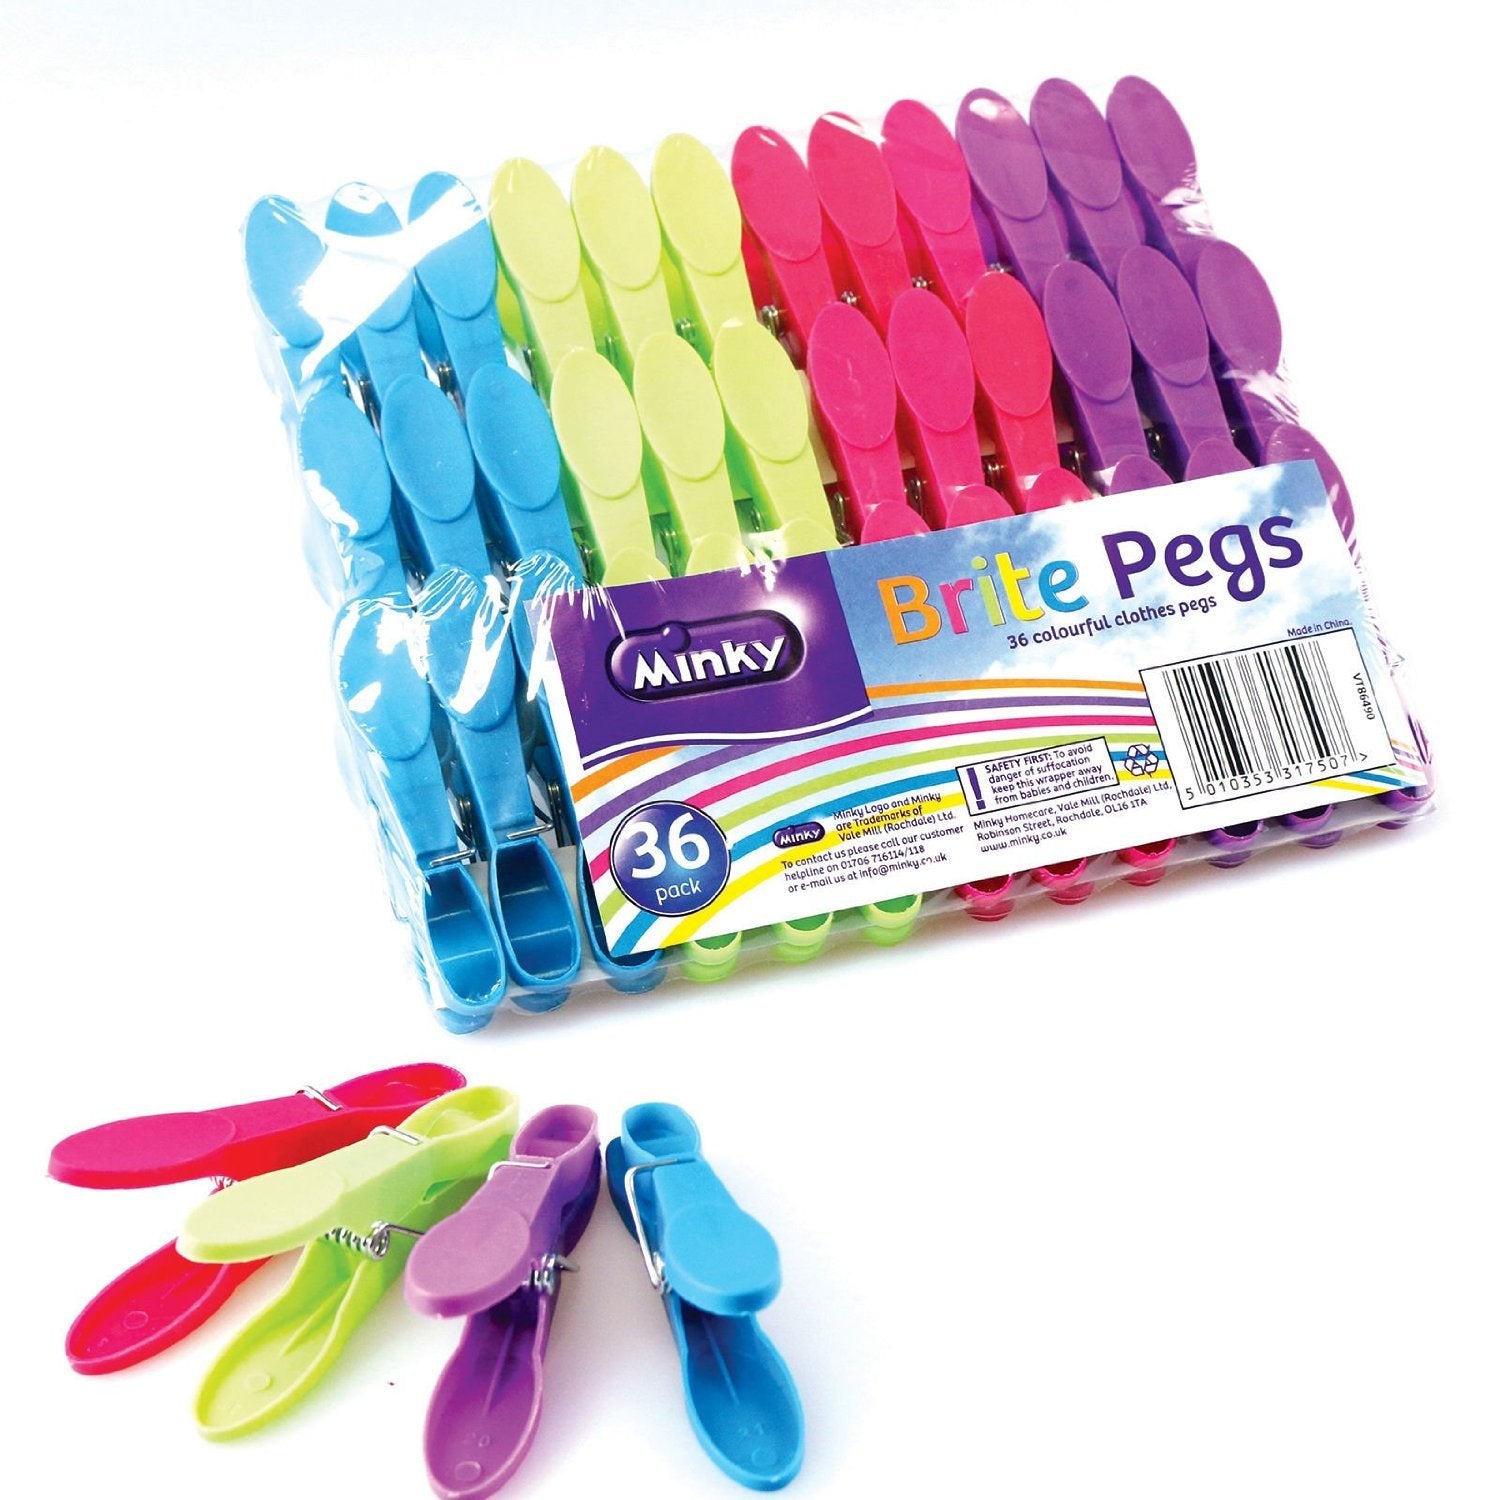 MINKY-BRITE-PLASTIC-CLOTHES-PEGS-36-Pack